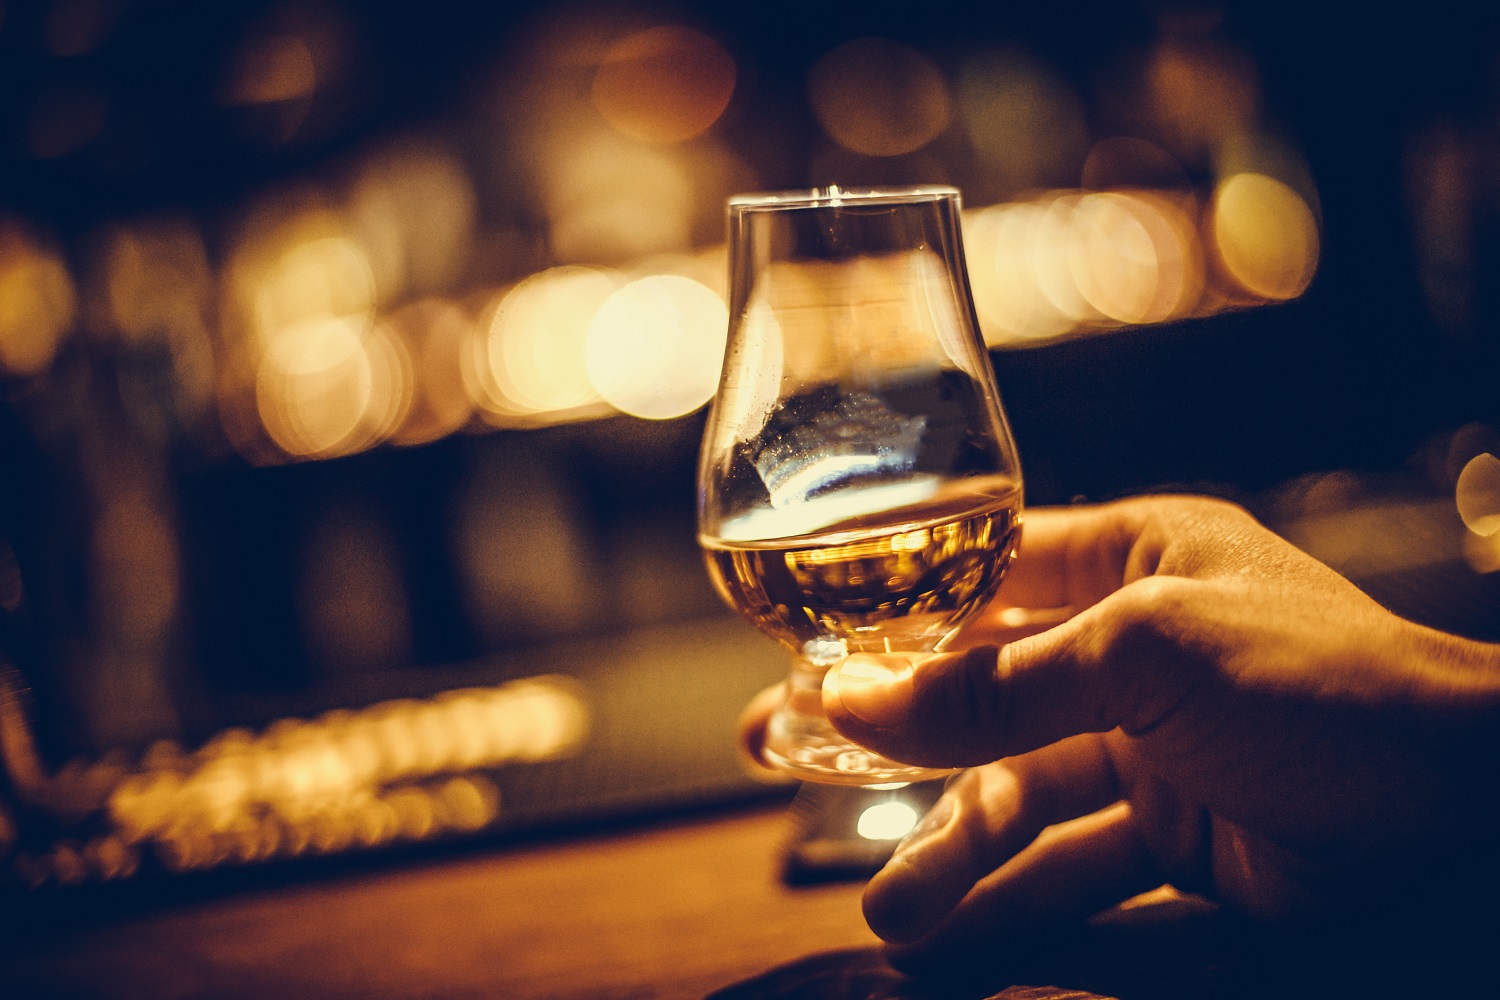 Scottish whisky can be a single malt, a single grain or a blend